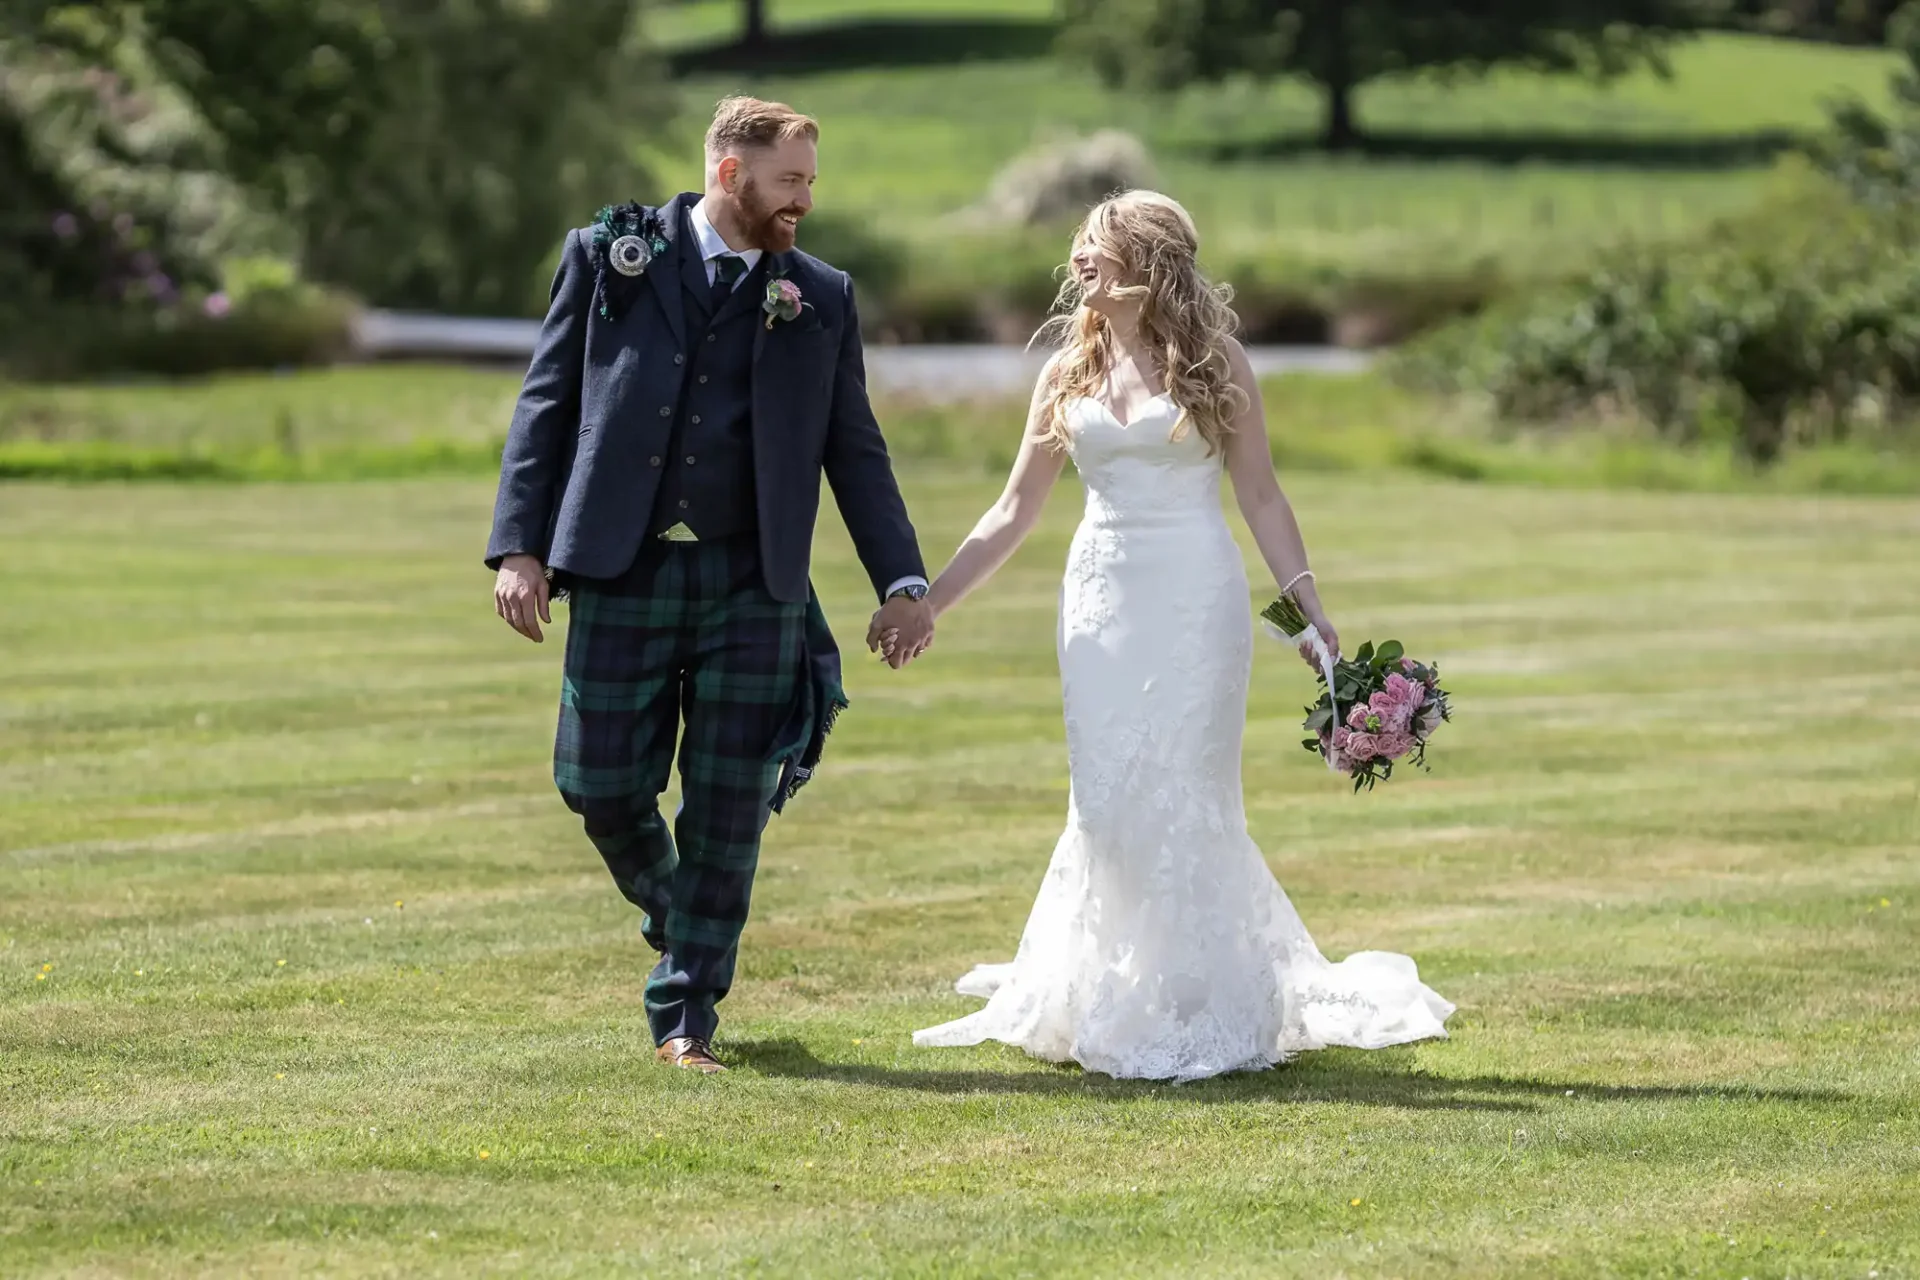 A bride in a white dress and a groom in a tartan kilt walk hand in hand across a grassy field on a sunny day, both smiling.